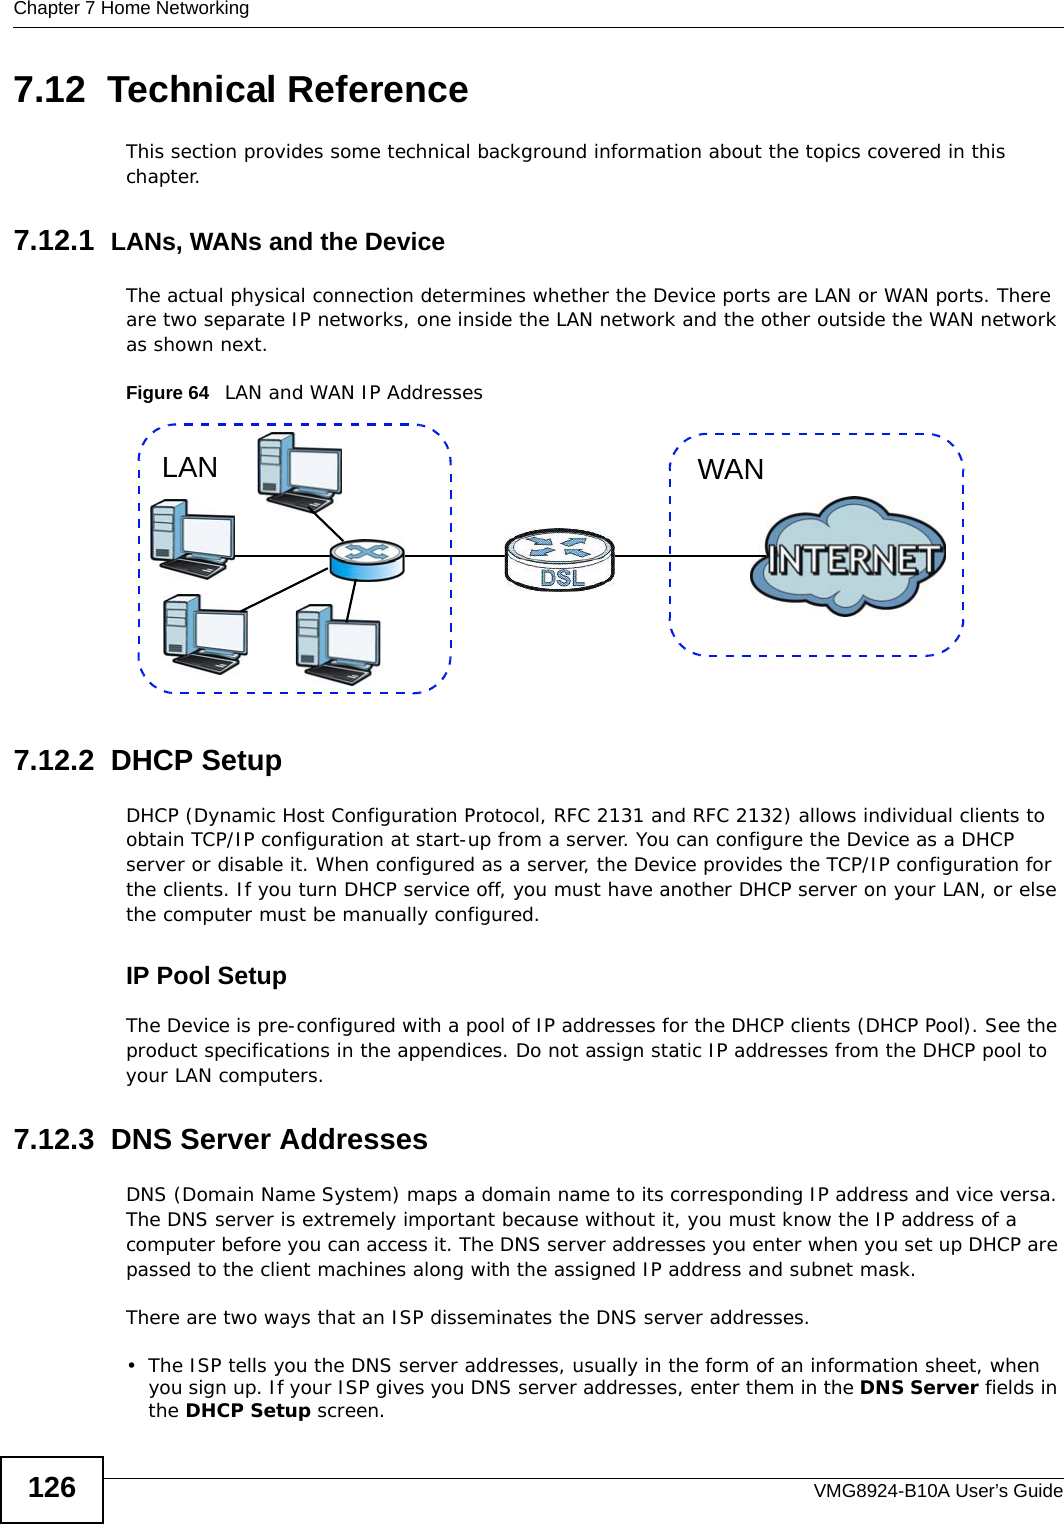 Chapter 7 Home NetworkingVMG8924-B10A User’s Guide1267.12  Technical ReferenceThis section provides some technical background information about the topics covered in this chapter.7.12.1  LANs, WANs and the DeviceThe actual physical connection determines whether the Device ports are LAN or WAN ports. There are two separate IP networks, one inside the LAN network and the other outside the WAN network as shown next.Figure 64   LAN and WAN IP Addresses7.12.2  DHCP SetupDHCP (Dynamic Host Configuration Protocol, RFC 2131 and RFC 2132) allows individual clients to obtain TCP/IP configuration at start-up from a server. You can configure the Device as a DHCP server or disable it. When configured as a server, the Device provides the TCP/IP configuration for the clients. If you turn DHCP service off, you must have another DHCP server on your LAN, or else the computer must be manually configured. IP Pool SetupThe Device is pre-configured with a pool of IP addresses for the DHCP clients (DHCP Pool). See the product specifications in the appendices. Do not assign static IP addresses from the DHCP pool to your LAN computers.7.12.3  DNS Server Addresses DNS (Domain Name System) maps a domain name to its corresponding IP address and vice versa. The DNS server is extremely important because without it, you must know the IP address of a computer before you can access it. The DNS server addresses you enter when you set up DHCP are passed to the client machines along with the assigned IP address and subnet mask.There are two ways that an ISP disseminates the DNS server addresses. • The ISP tells you the DNS server addresses, usually in the form of an information sheet, when you sign up. If your ISP gives you DNS server addresses, enter them in the DNS Server fields in the DHCP Setup screen.WANLAN